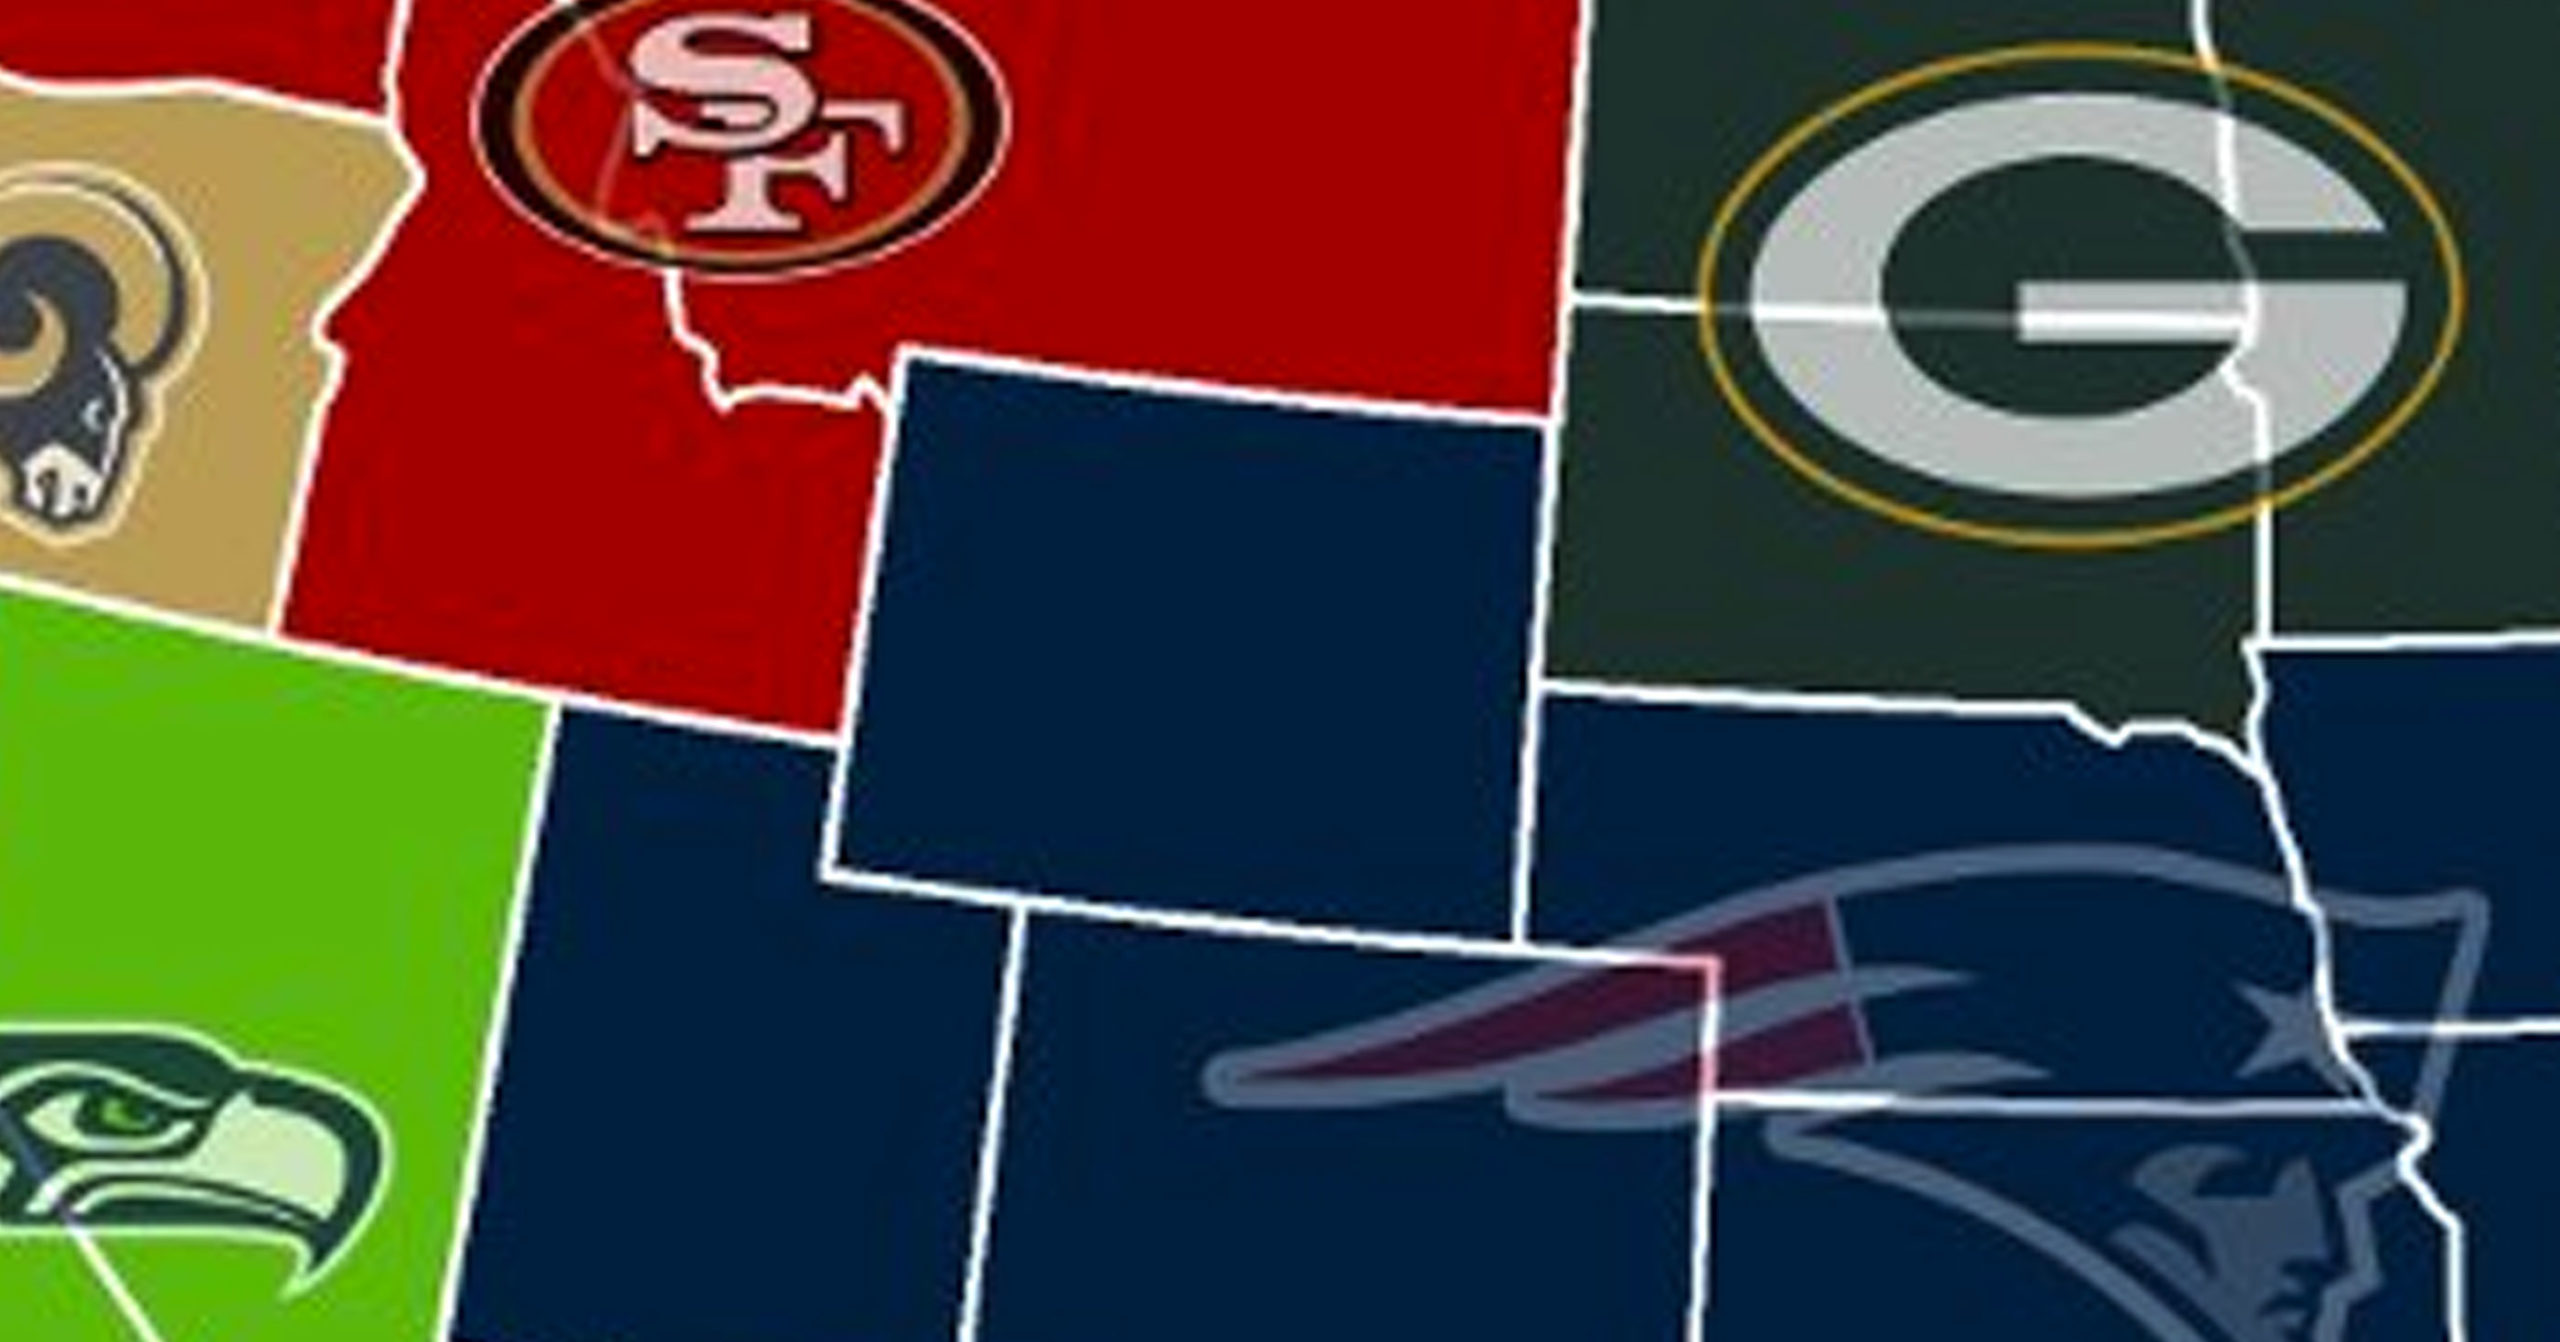 Most Hated Nfl Teams Deals Clearance, Save 65 jlcatj.gob.mx